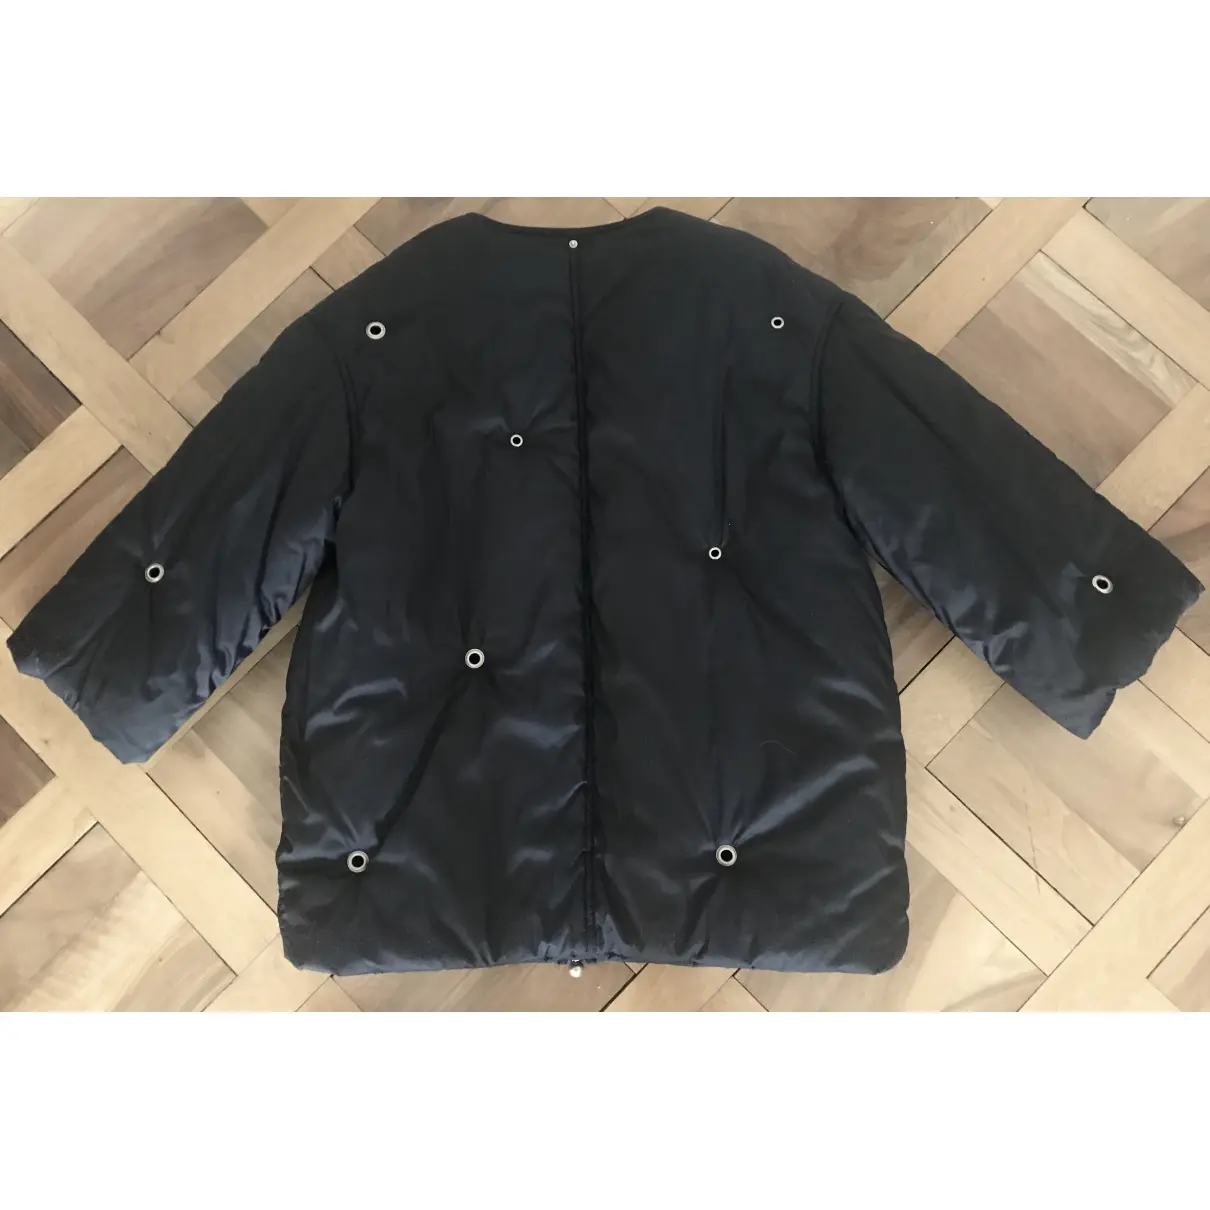 Claude Montana Puffer for sale - Vintage